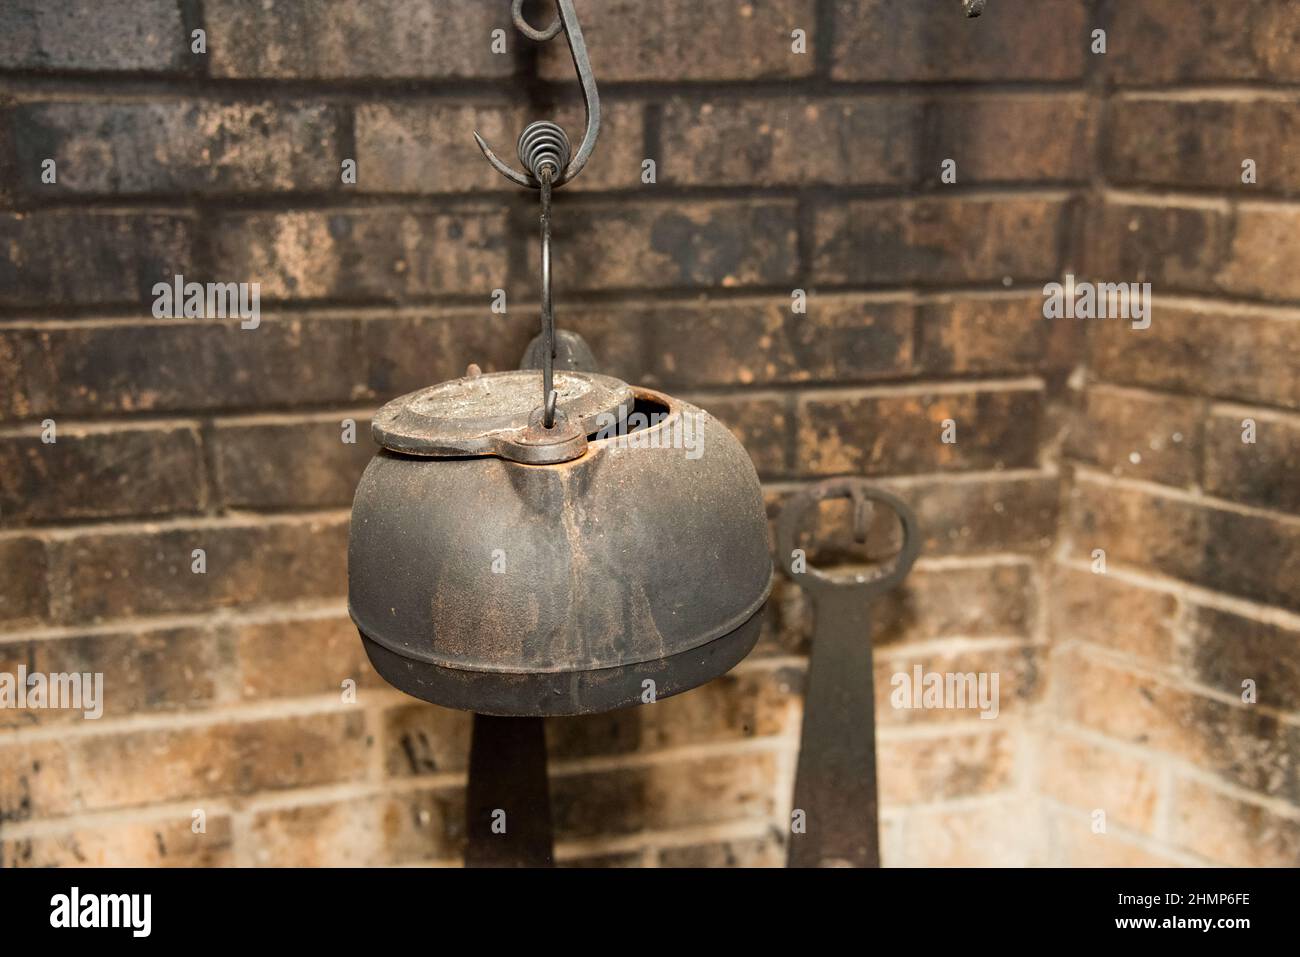 Cast iron cookware on colonial hearth Stock Photo